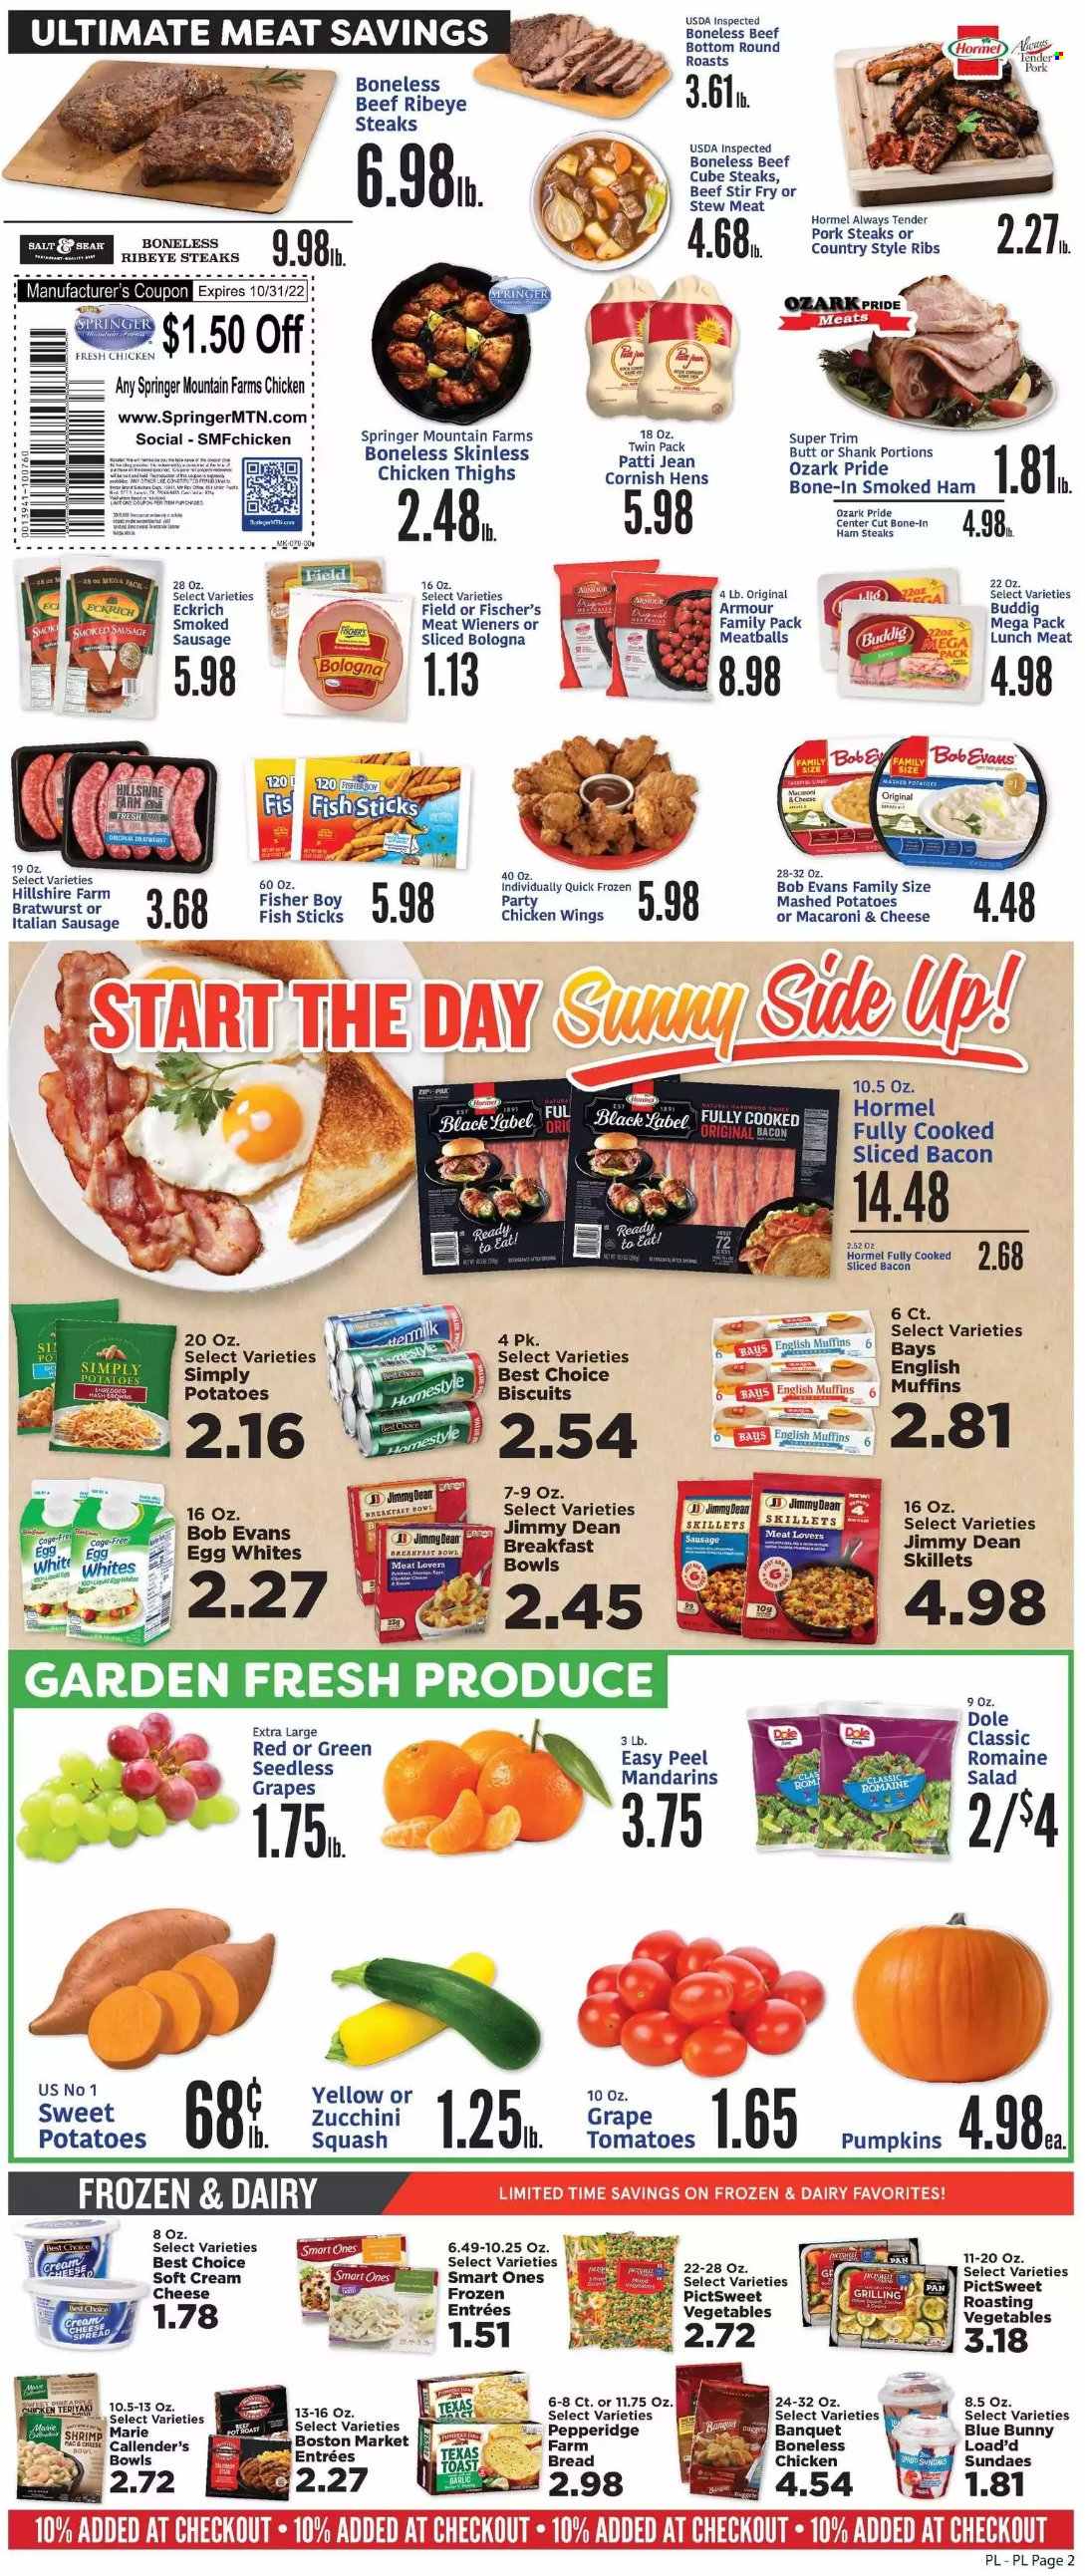 thumbnail - Price Less Foods Flyer - 09/28/2022 - 10/04/2022 - Sales products - stew meat, bread, english muffins, sweet potato, tomatoes, zucchini, pumpkin, salad, Dole, mandarines, seedless grapes, fish, shrimps, fish fingers, fish sticks, macaroni & cheese, mashed potatoes, meatballs, breakfast bowl, Bob Evans, Jimmy Dean, Hormel, bacon, ham, Hillshire Farm, smoked ham, bratwurst, sausage, smoked sausage, italian sausage, cheese spread, lunch meat, ham steaks, cream cheese, eggs, cage free eggs, Blue Bunny, chicken wings, biscuit, salt, chicken thighs, beef meat, steak, ribeye steak, pork chops, pork meat, pork ribs, country style ribs. Page 3.